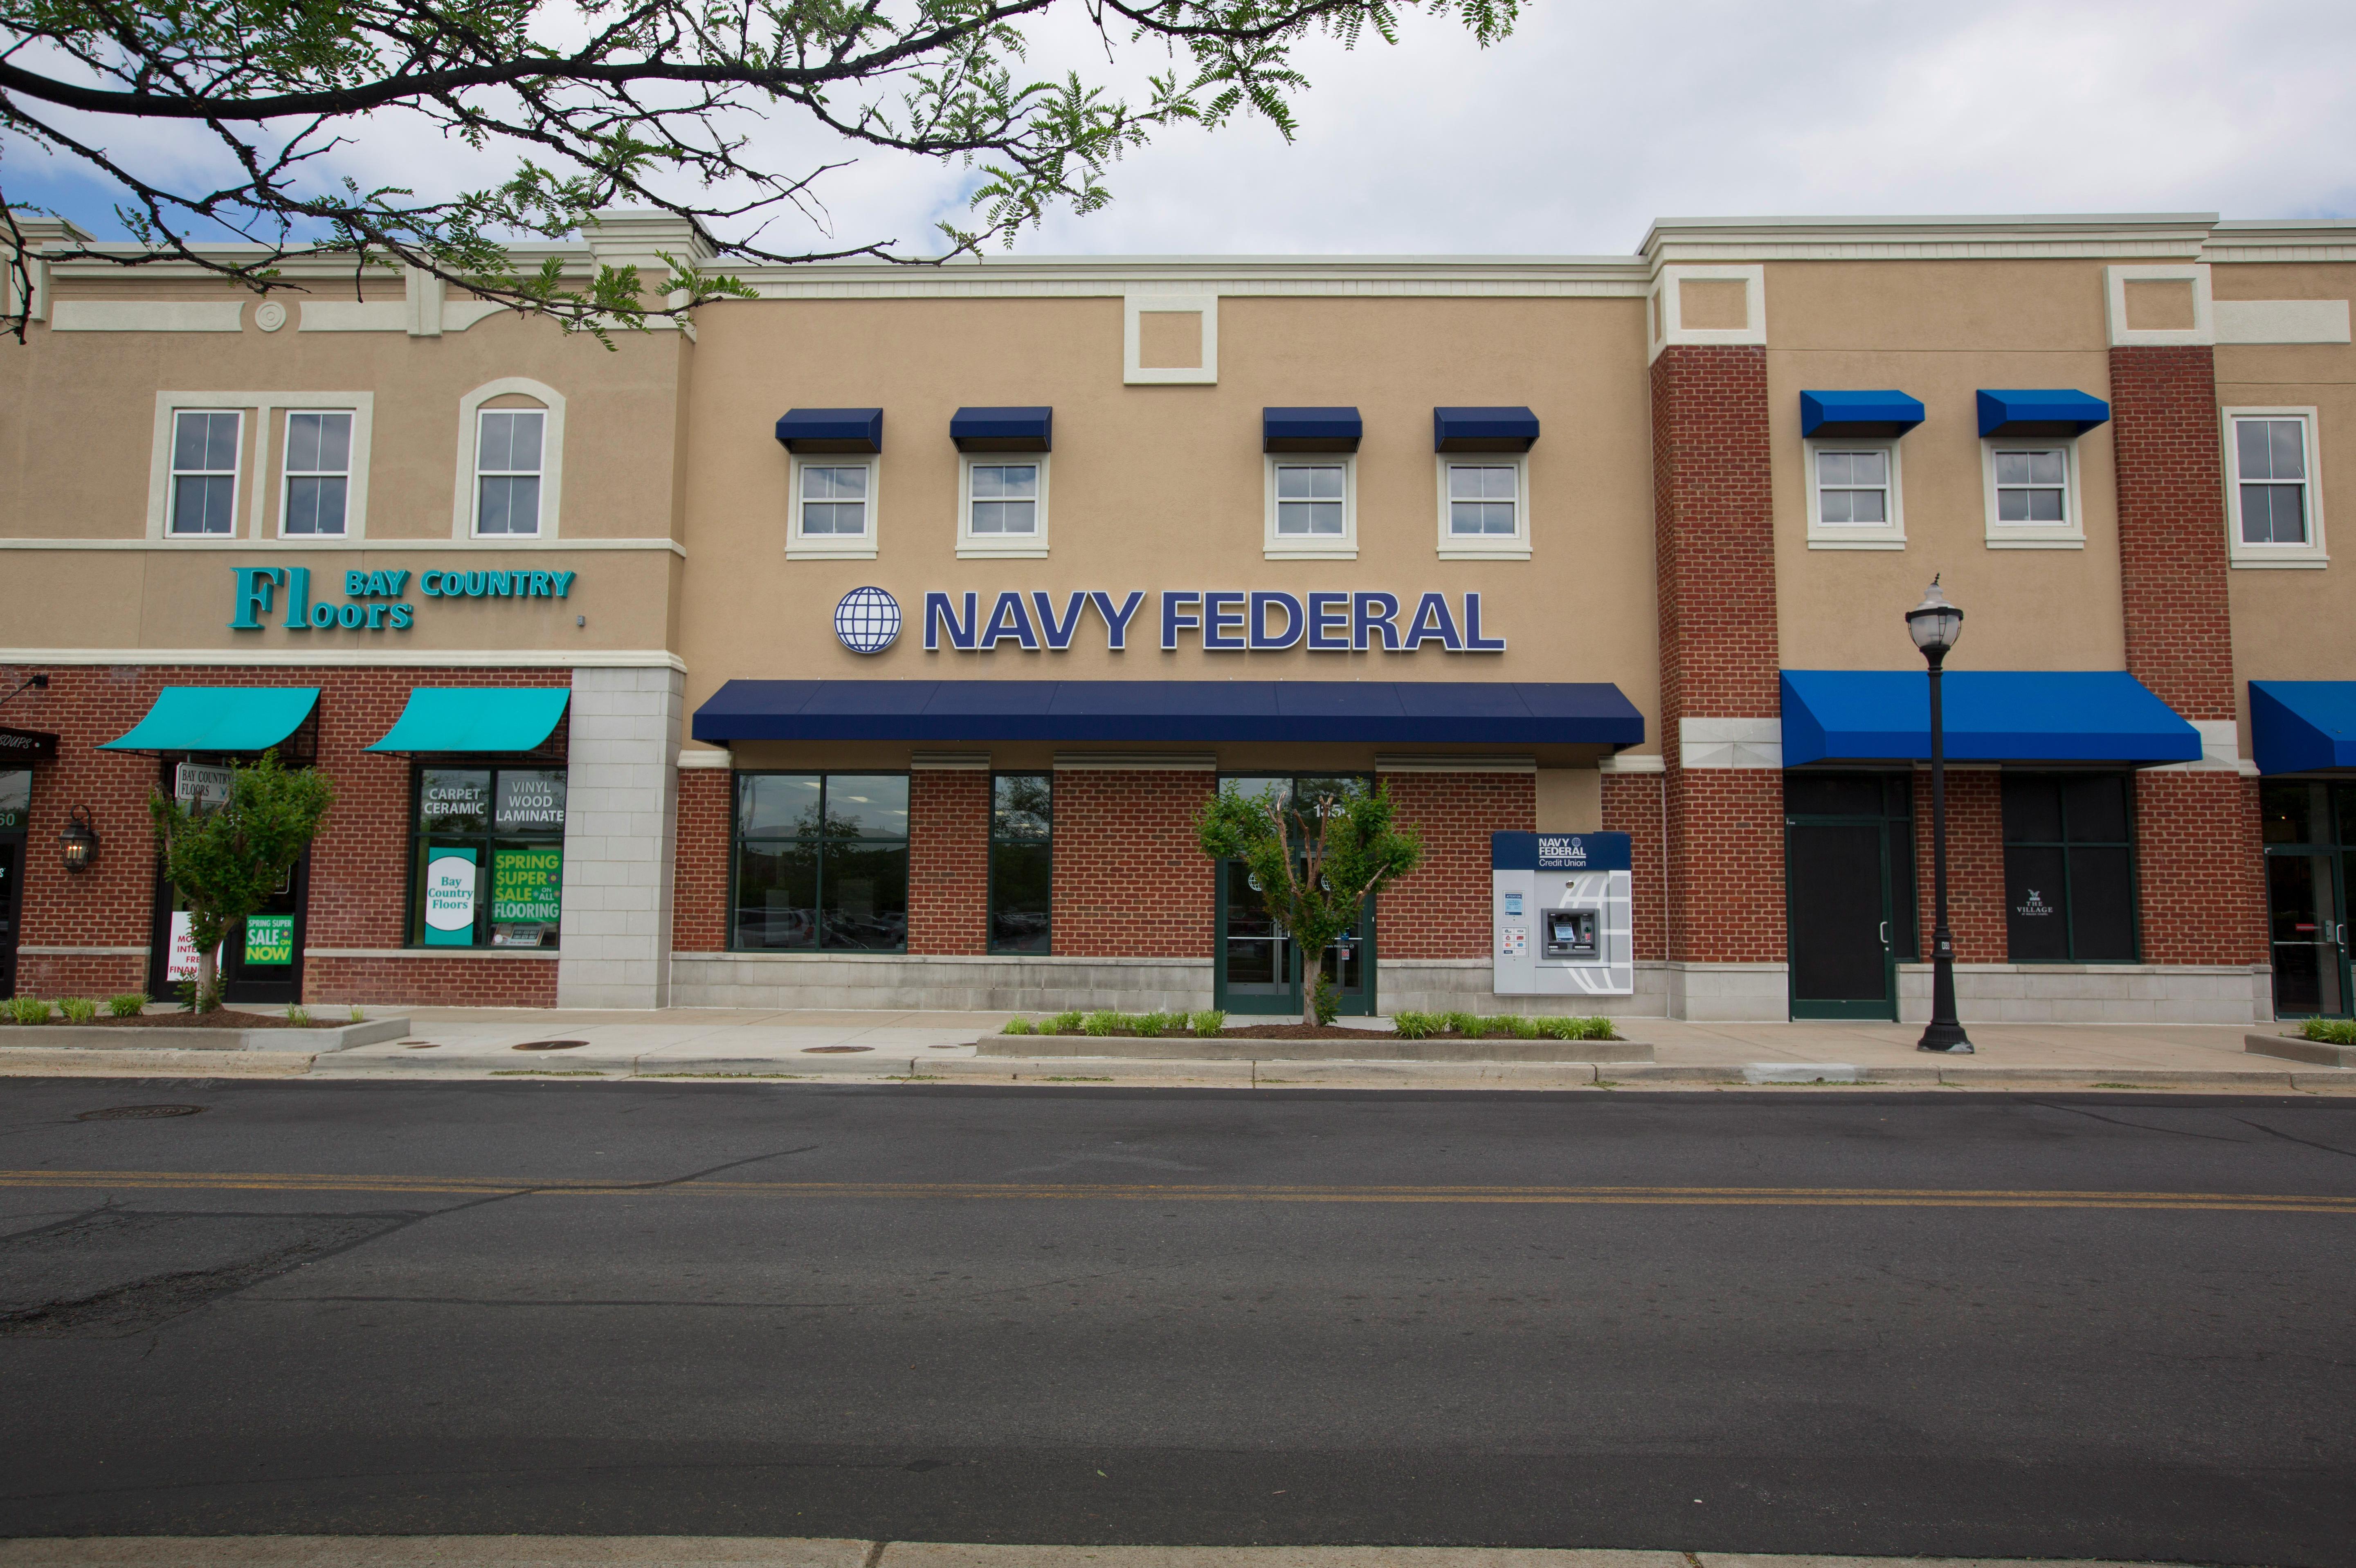 Navy Federal Credit Union Coupons near me in Gambrills, MD 21054 | 8coupons